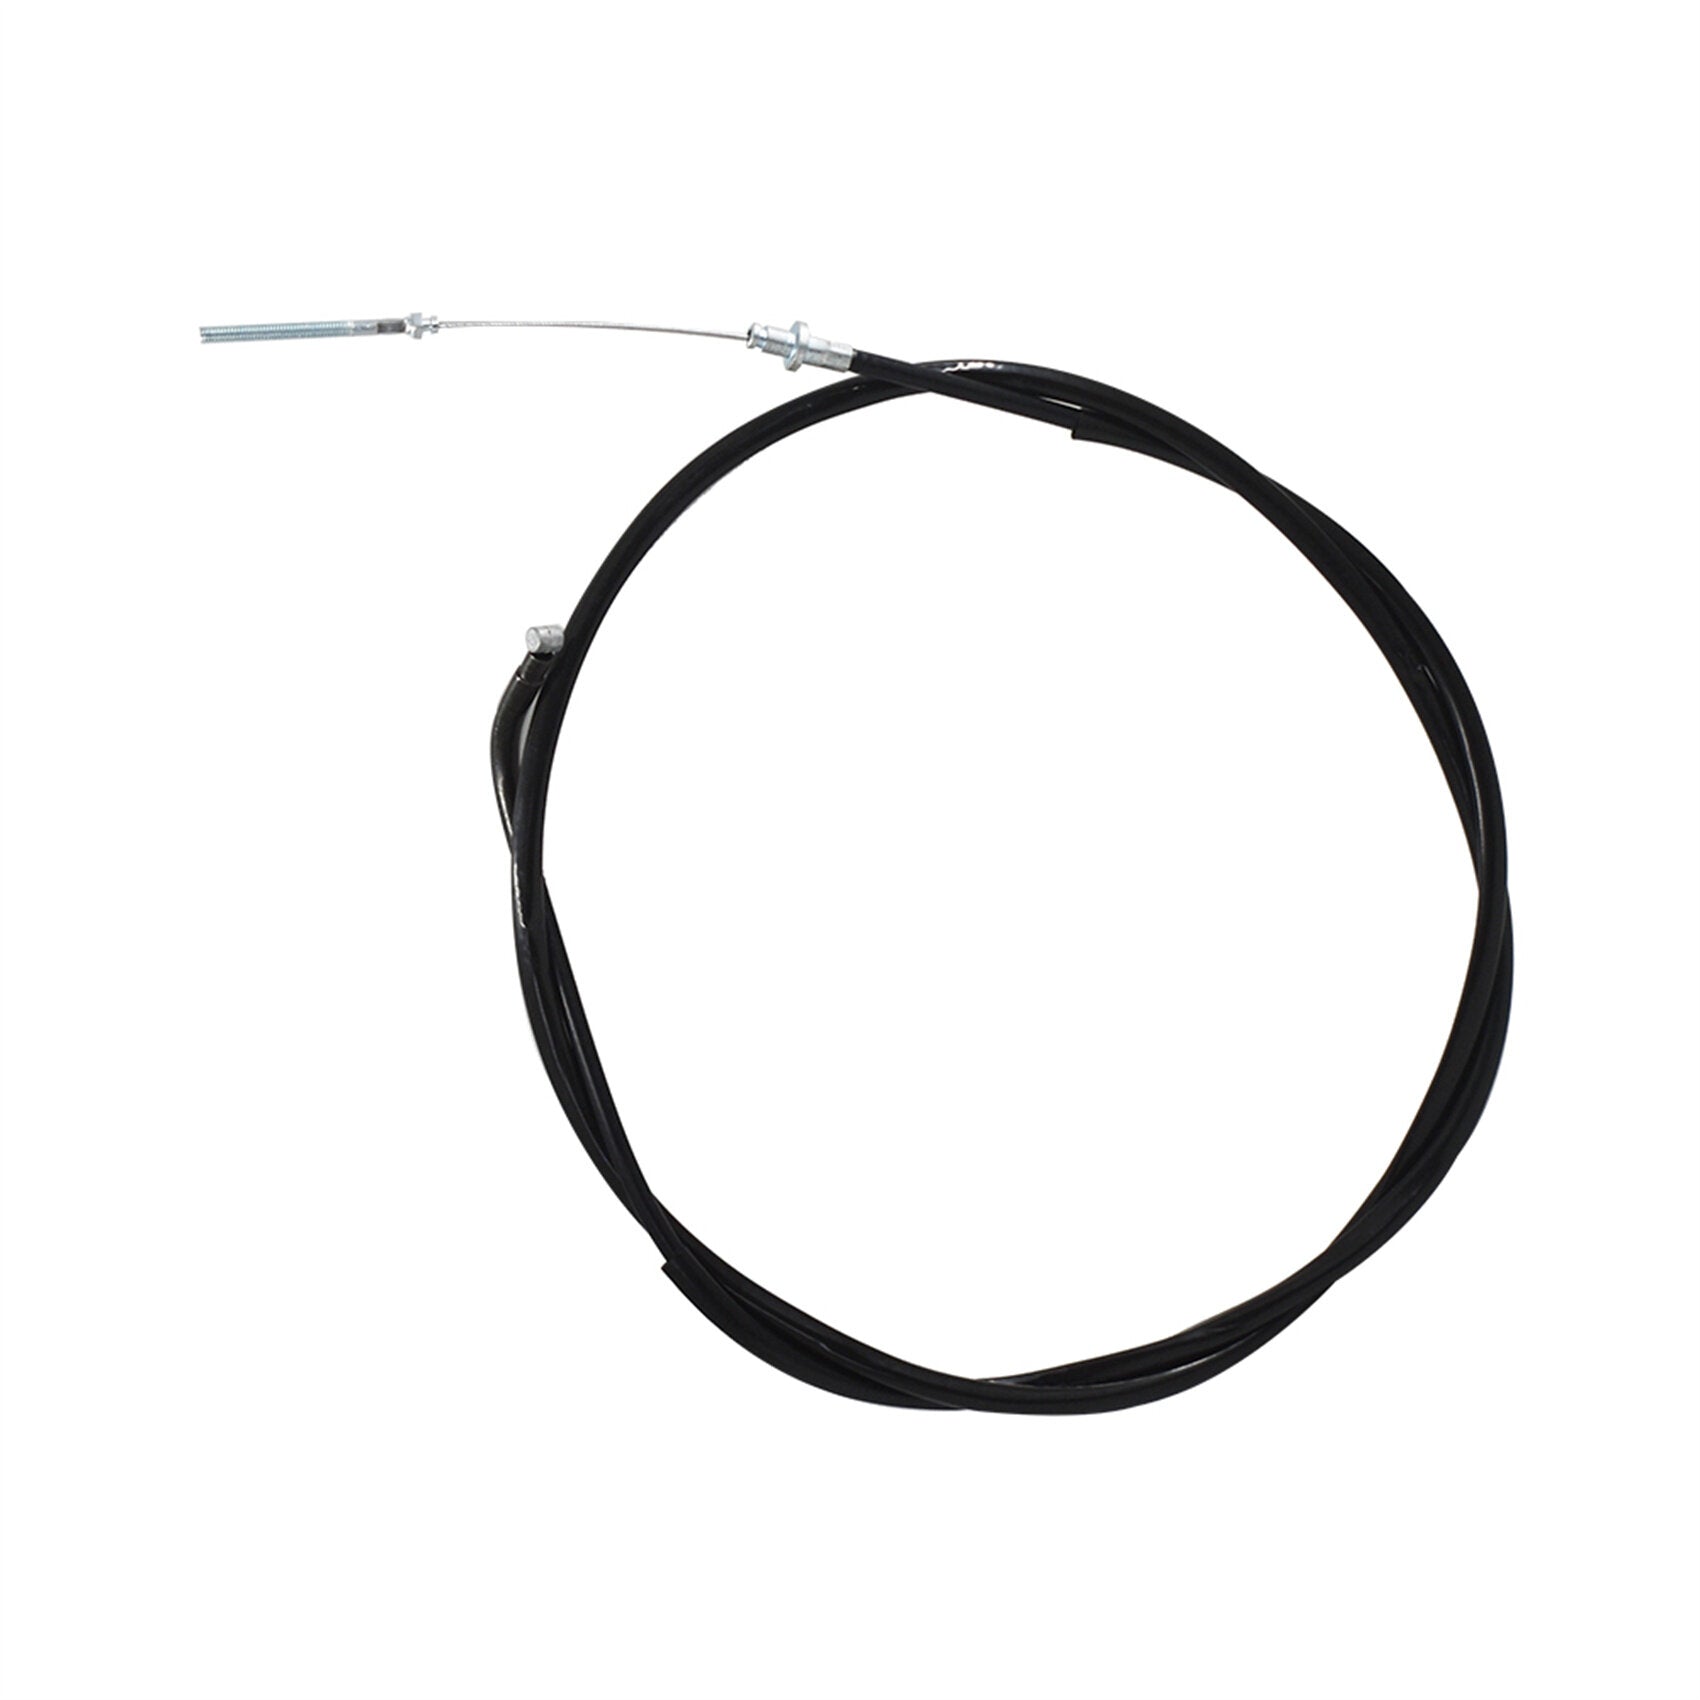 labwork Rear Hand Brake Cable Replacement for Big Bear 350 2x4 YFM350U 1996-1998 Replacement for Kodiak 400 4x4 YFM400FW 1993-1998